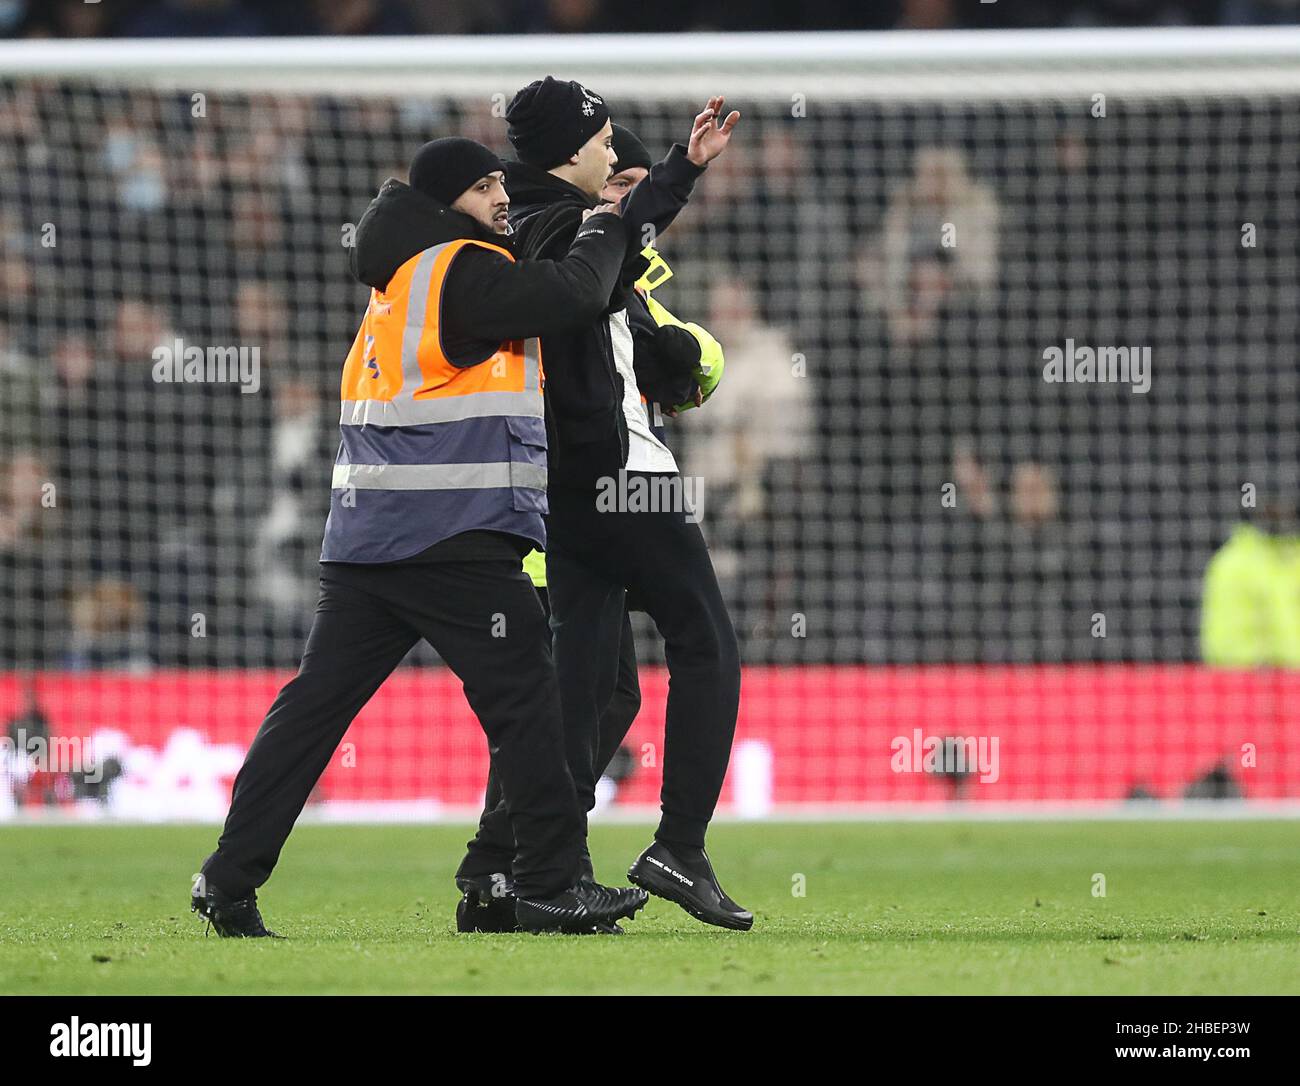 London, England, 19th December 2021. A fan runs who runs onto he pitch is taken off by stewards during the Premier League match at the Tottenham Hotspur Stadium, London. Picture credit should read: Paul Terry / Sportimage Stock Photo